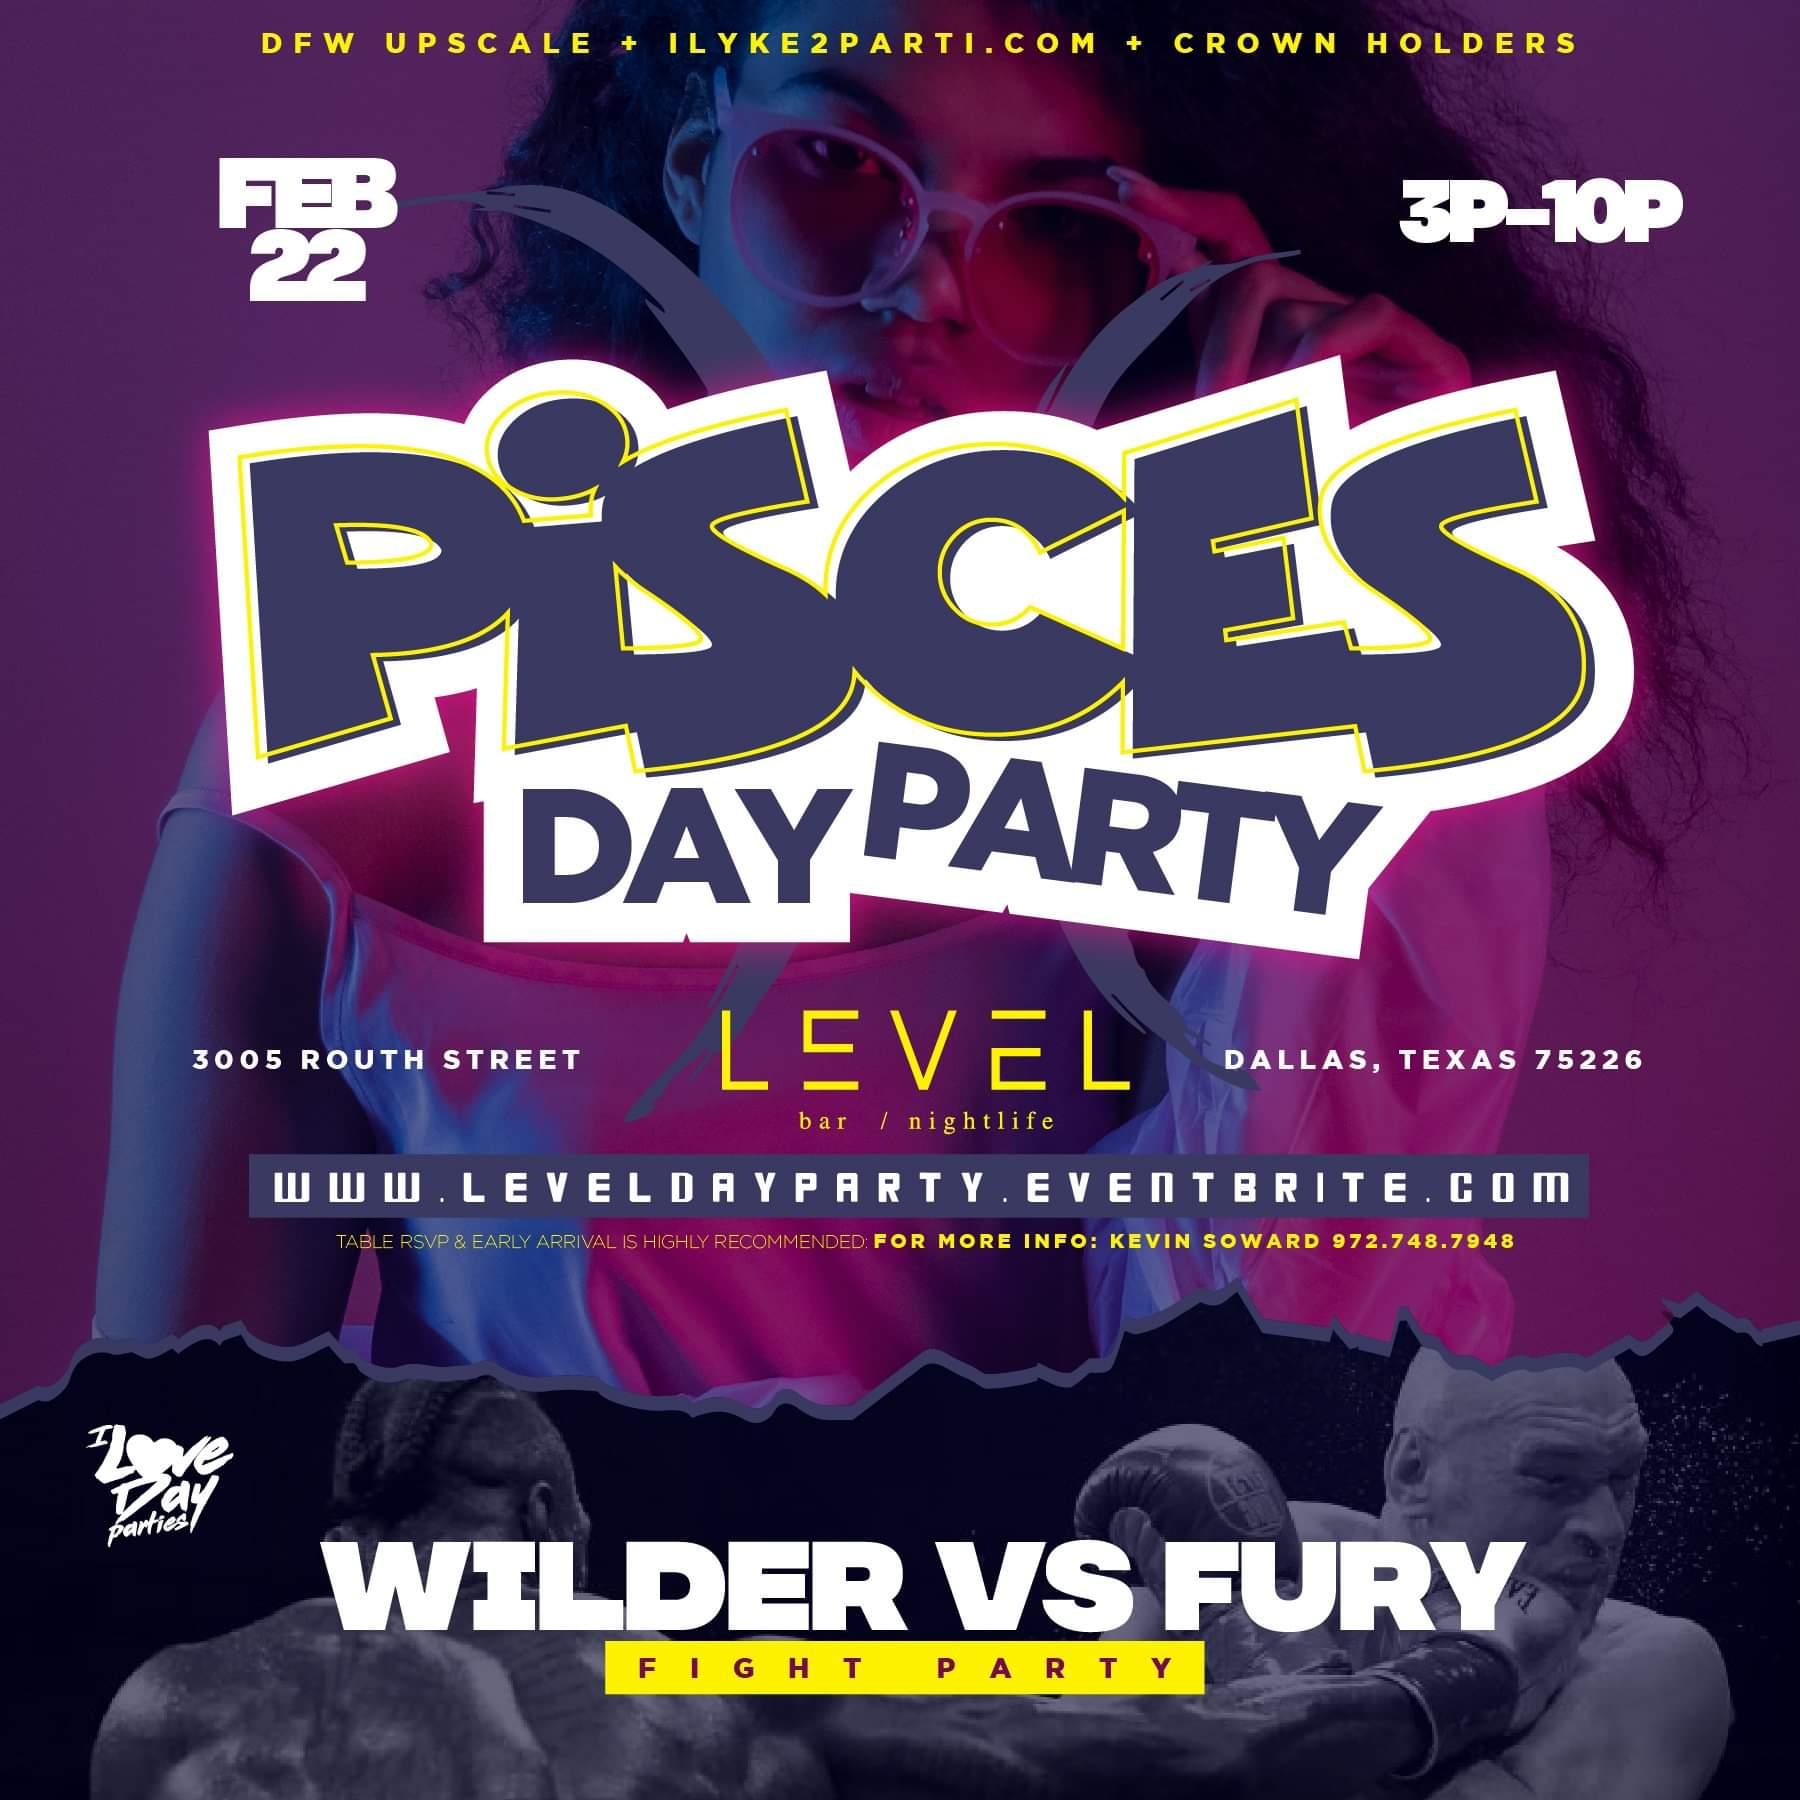  The Pisces Day Party + Wilder Fight Party @ Level Uptown 